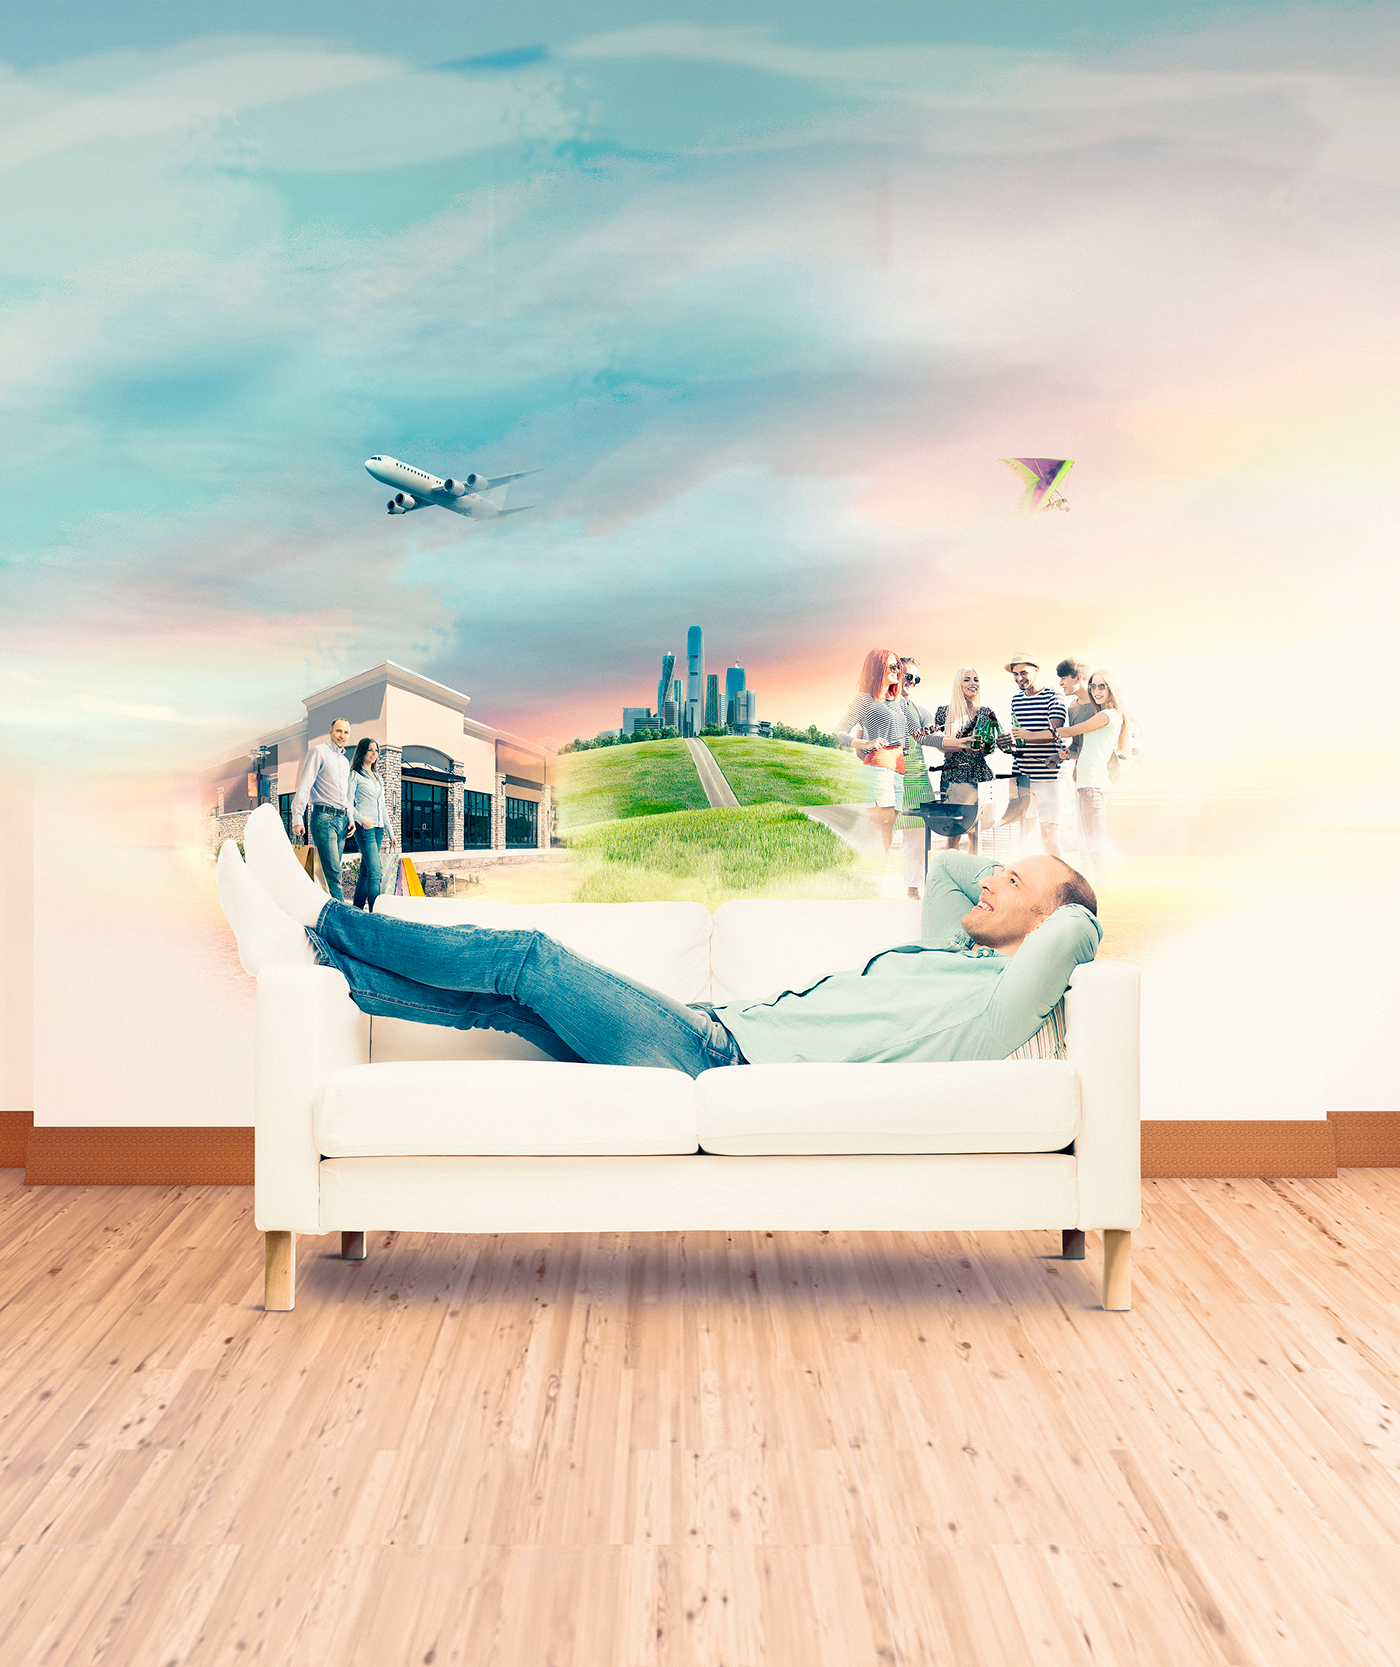 photoshop retouch relax man sofa sicoob Couch lounge barbecue grass Shopping blue purple airplane city